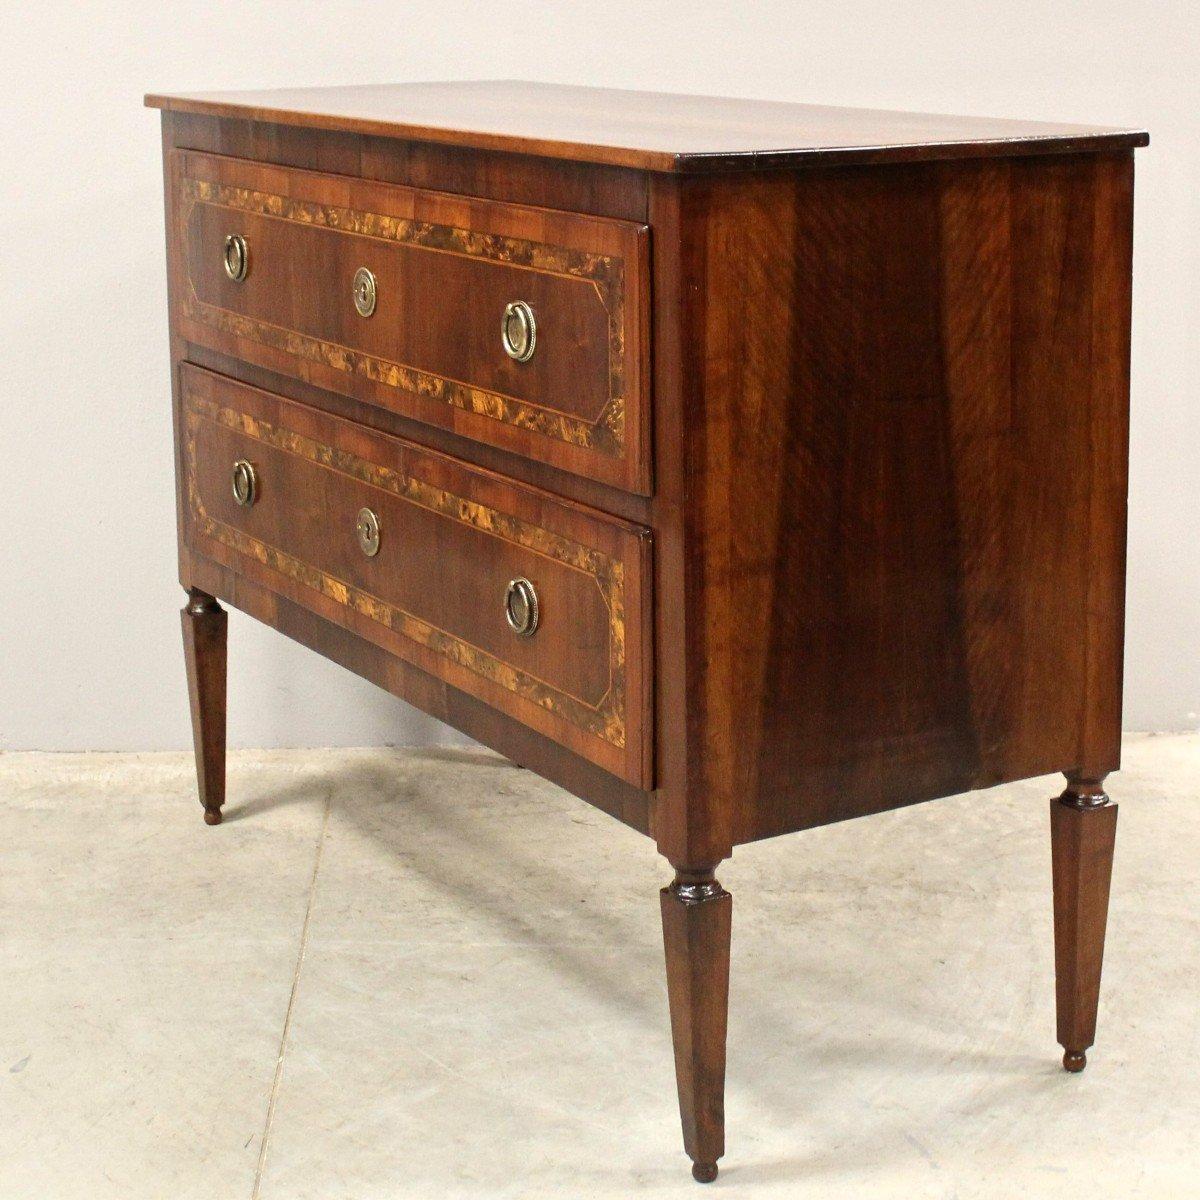 An Italian walnut commode from the 18th century with two drawers and tapered legs. Step into the world of Italian craftsmanship with this exquisite 18th-century walnut commode. The walnut construction emanates a rich, deep hue, perfectly contrasted